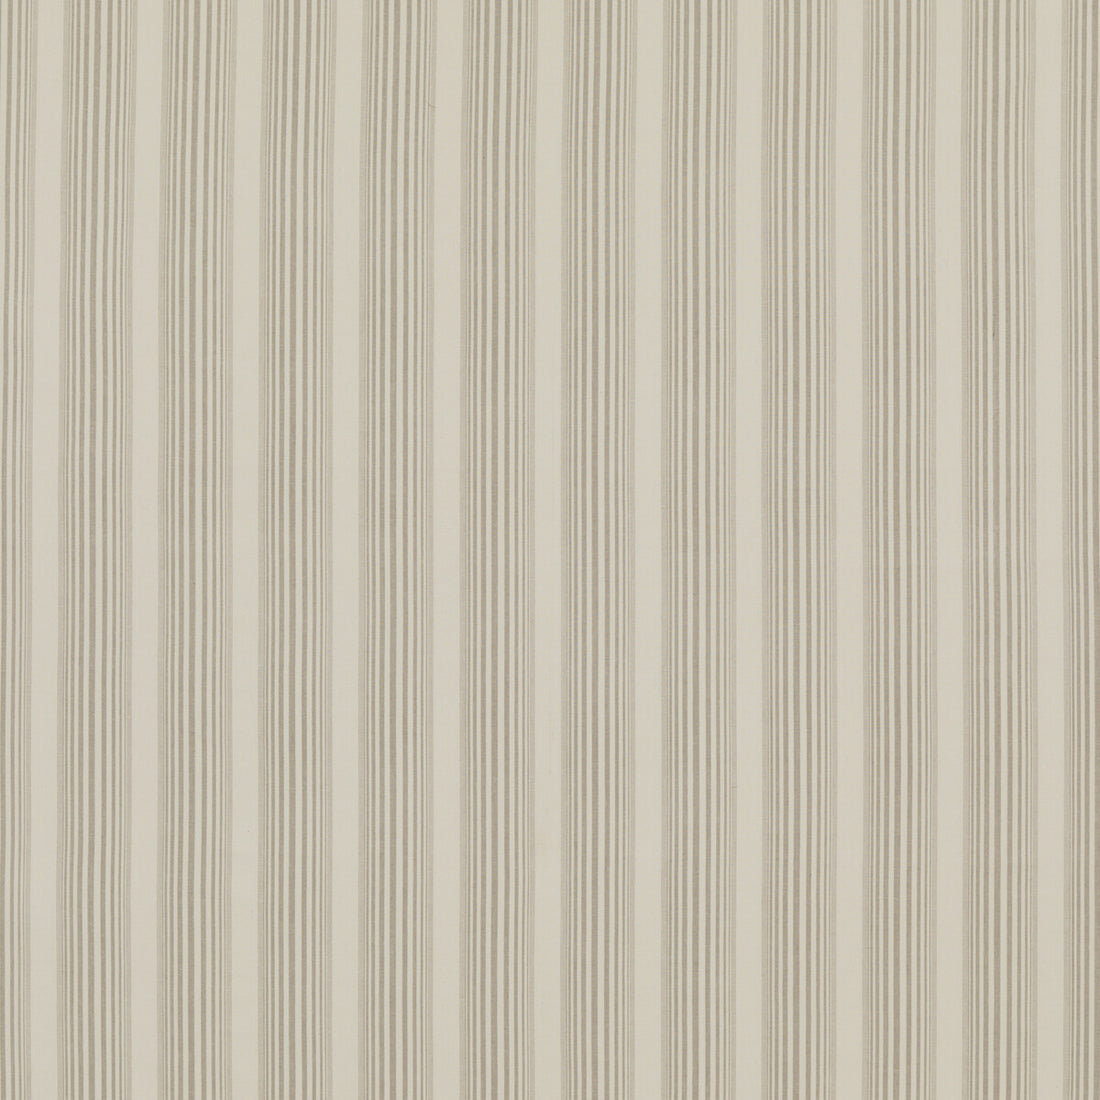 Medland fabric in taupe color - pattern ED85310.210.0 - by Threads in the Great Stripes collection